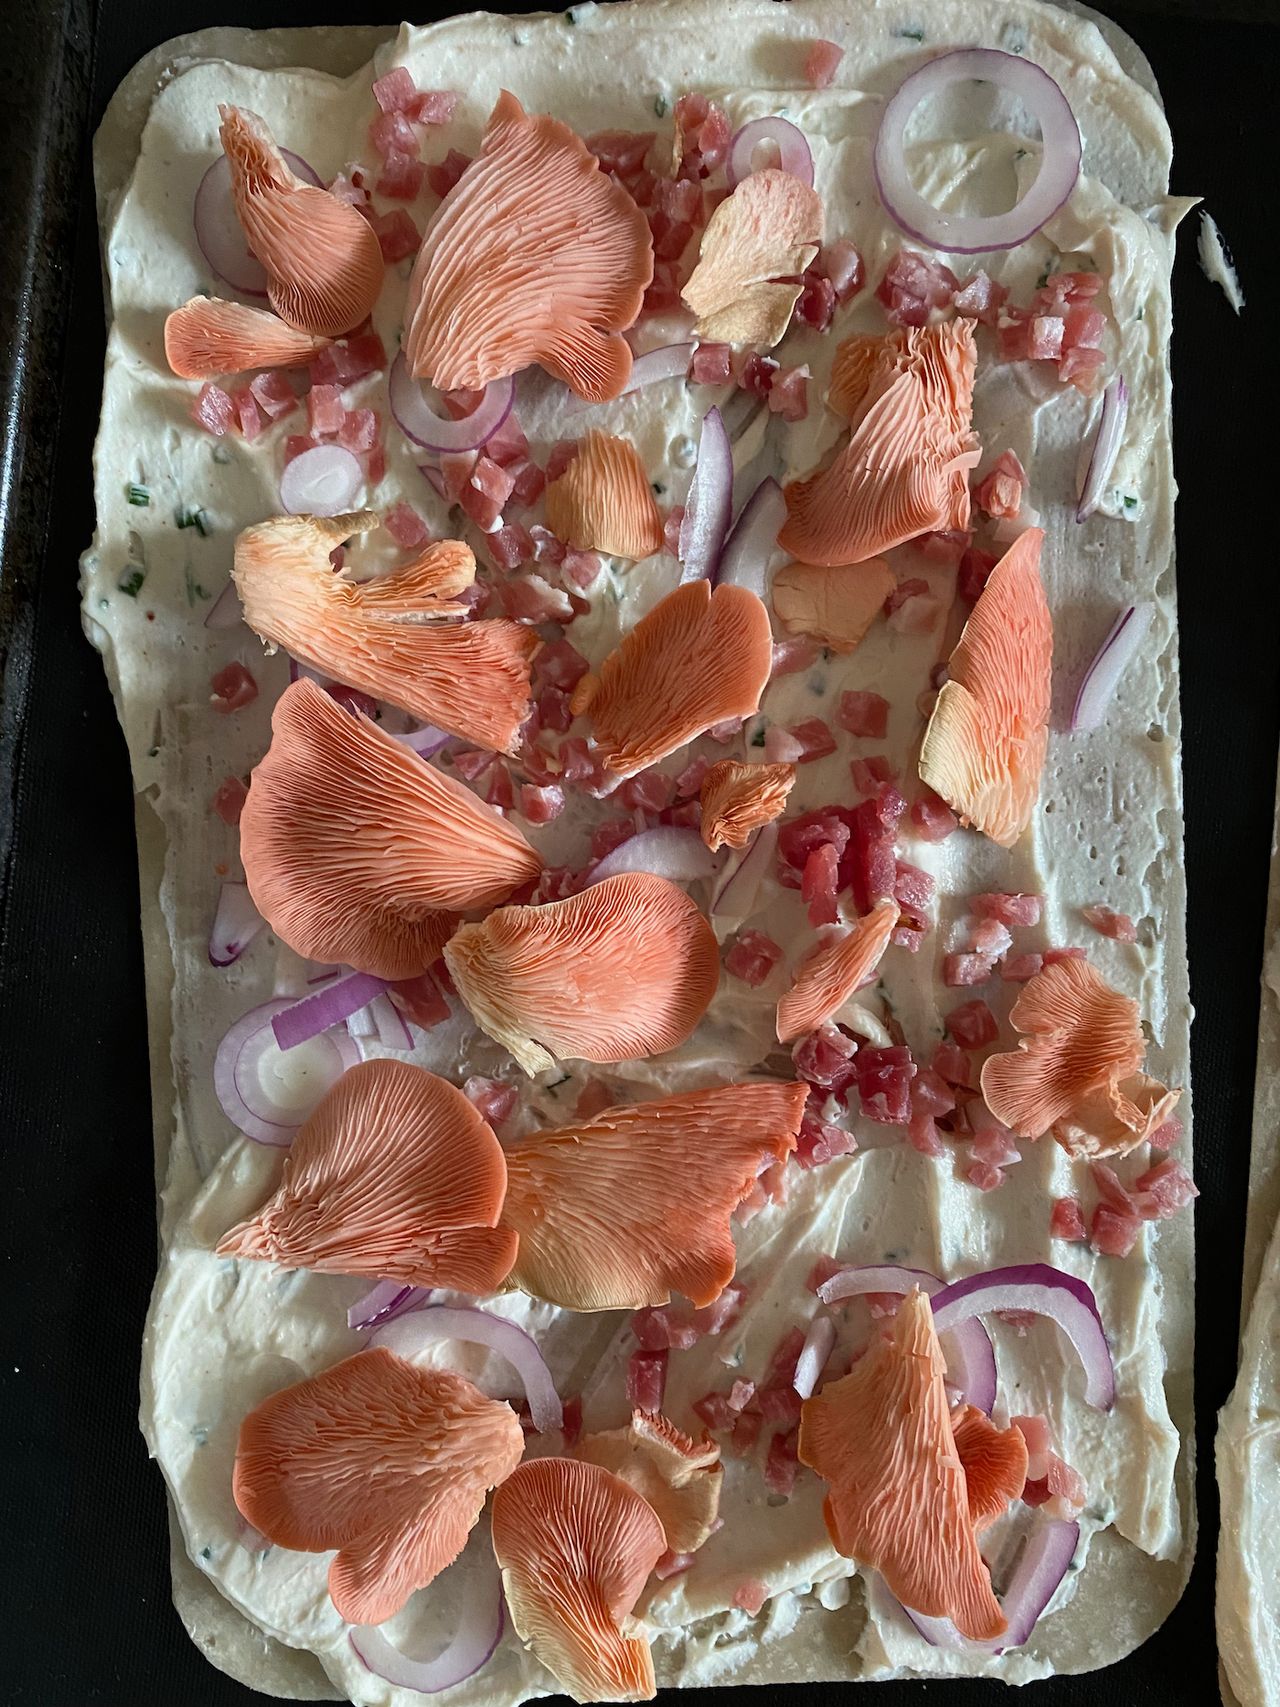 Pink oyster mushrooms picked apart and placed on top of an unbaked flatbread pizza that also has cream cheese, red onions, and bacon cubes.